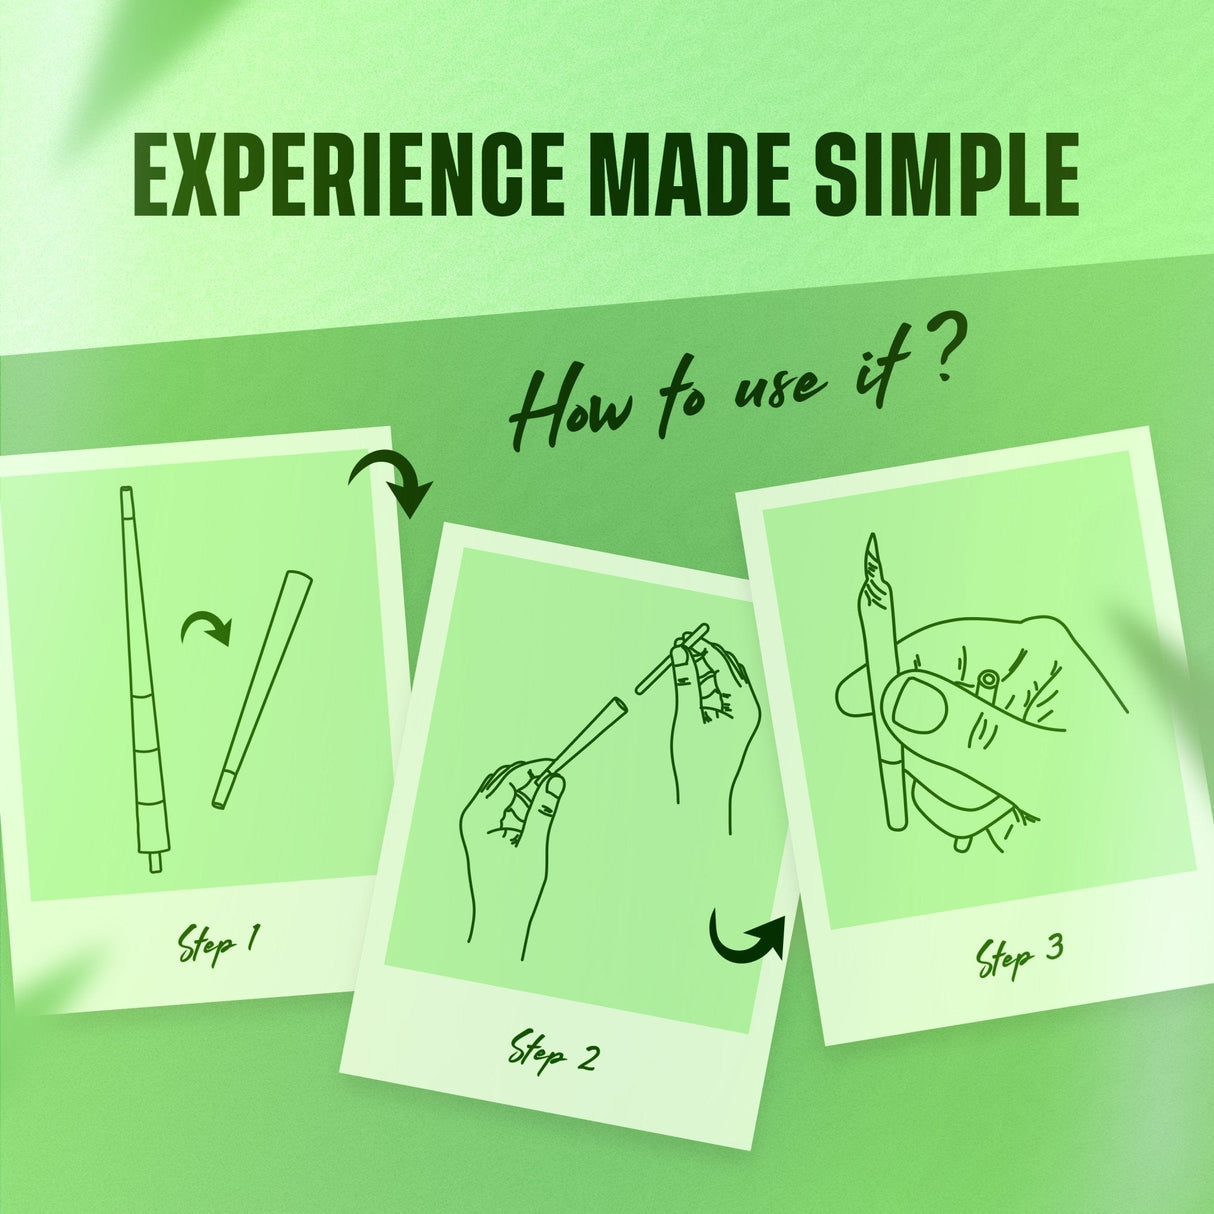 Empire Rolling Papers Ultra Smooth Hemp Cones instructions, three-step visual guide